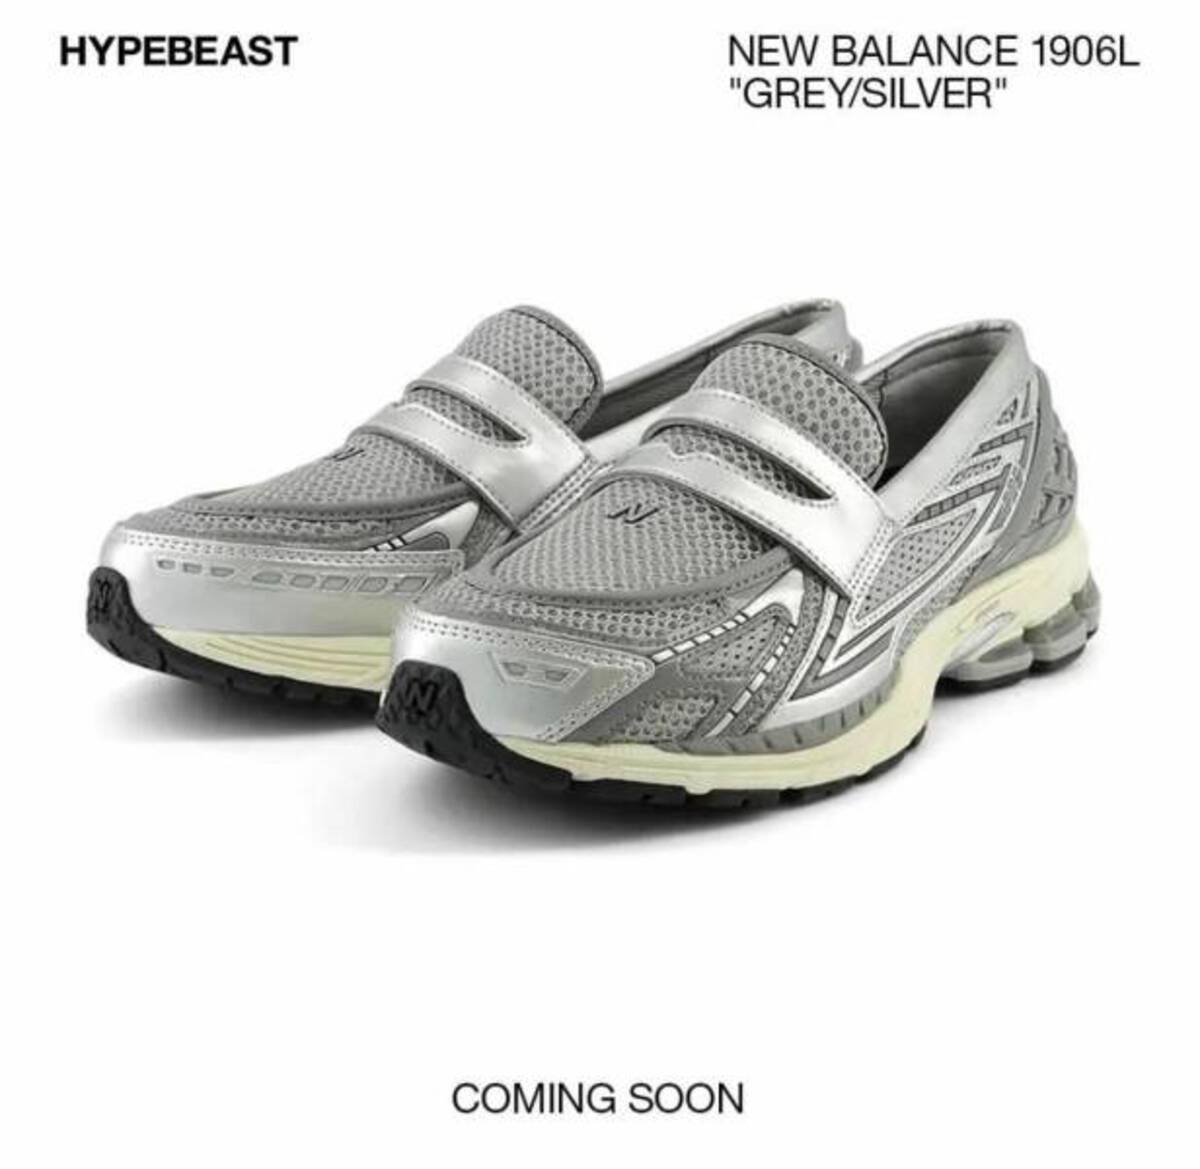 new balance 1906 loafer - Hypebeast New Balance 1906L "GreySilver" Coming Soon